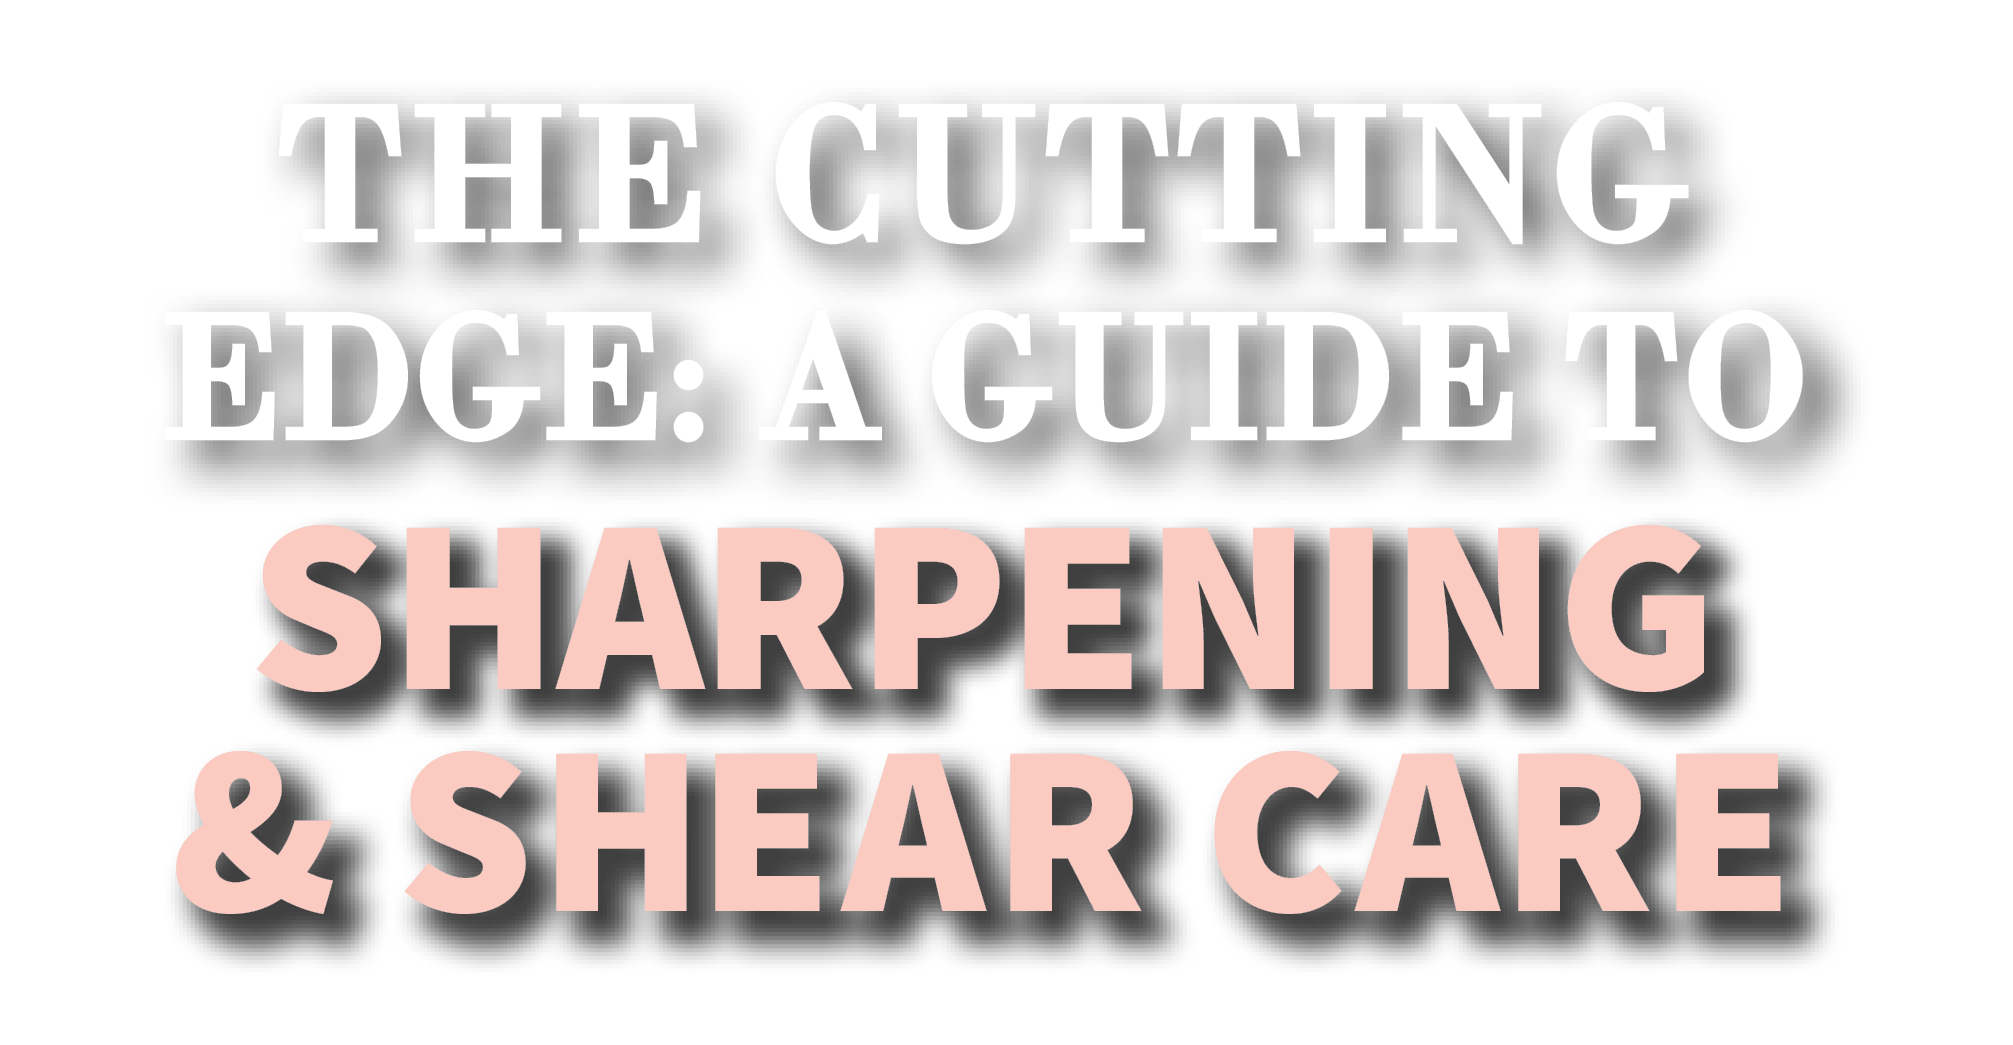 The Cutting Edge: A Guide to Sharpening & Shear Care